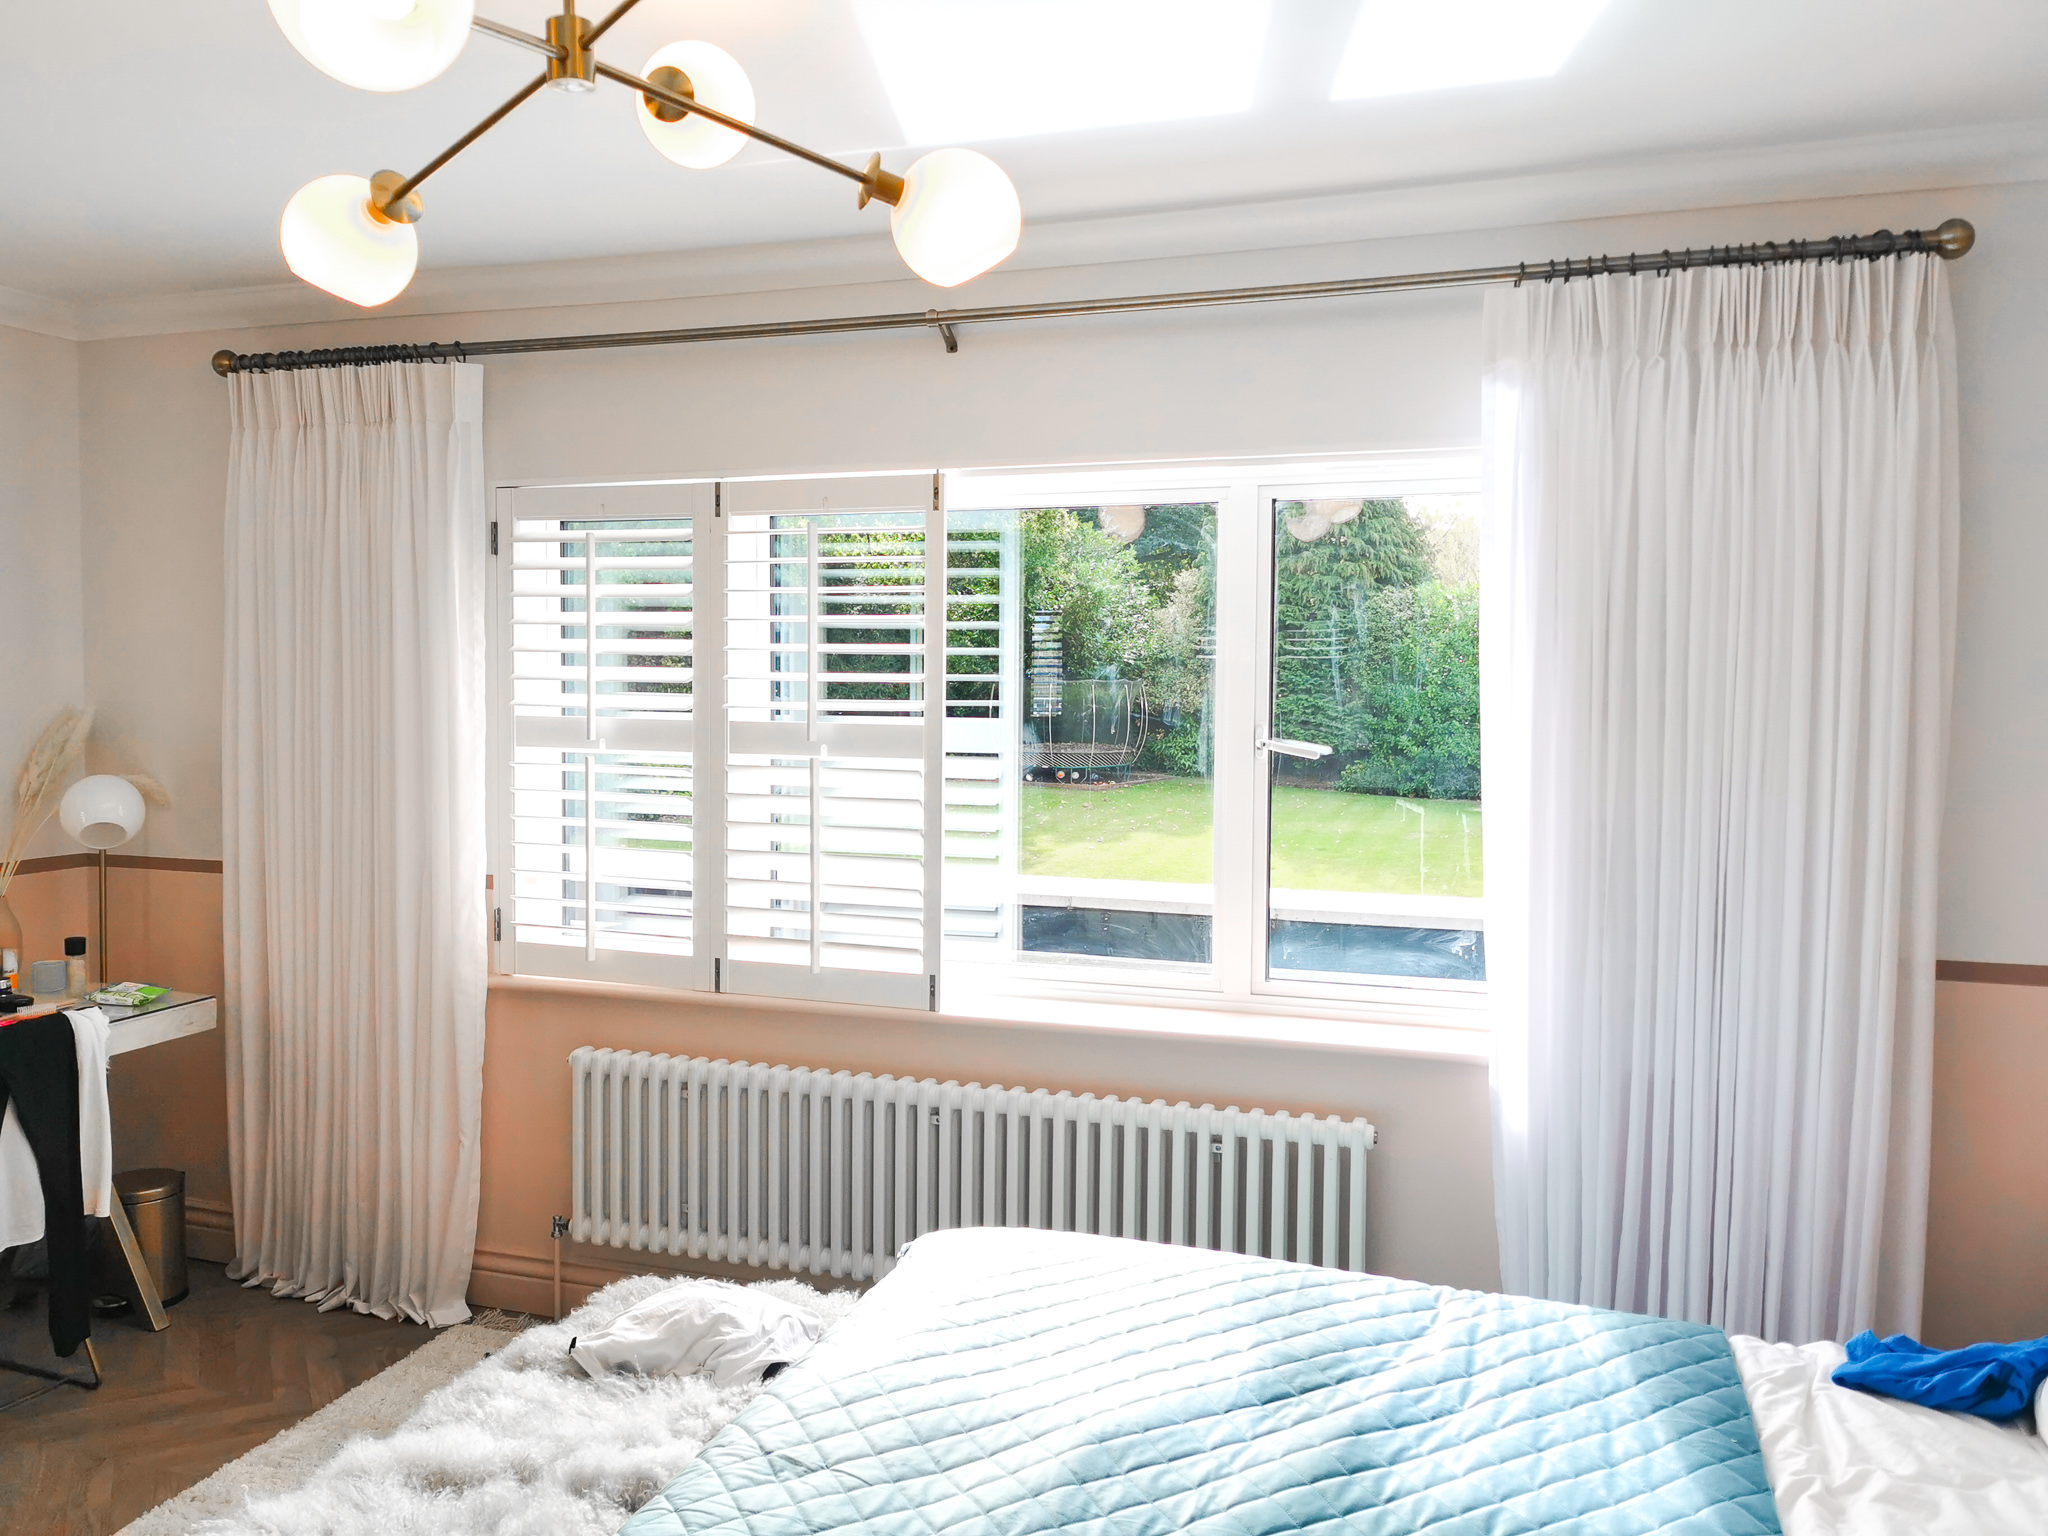 Bedroom sheer curtains with gold pole and shutters